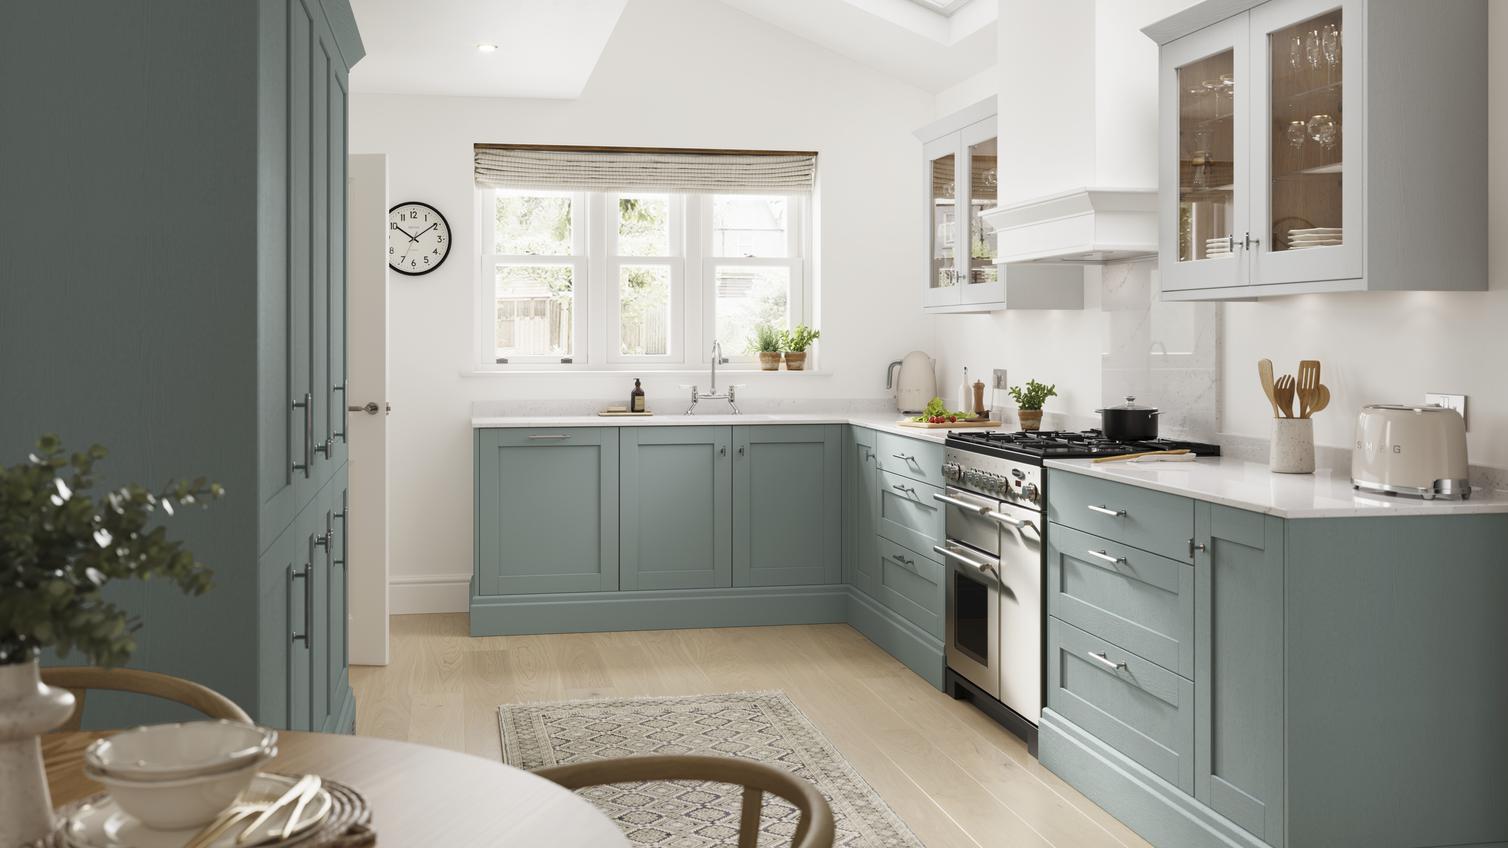 A blue kitchen idea with seafoam shaker cupboards. Contains white worktops, timber floors, and a double-bowl butler sink.